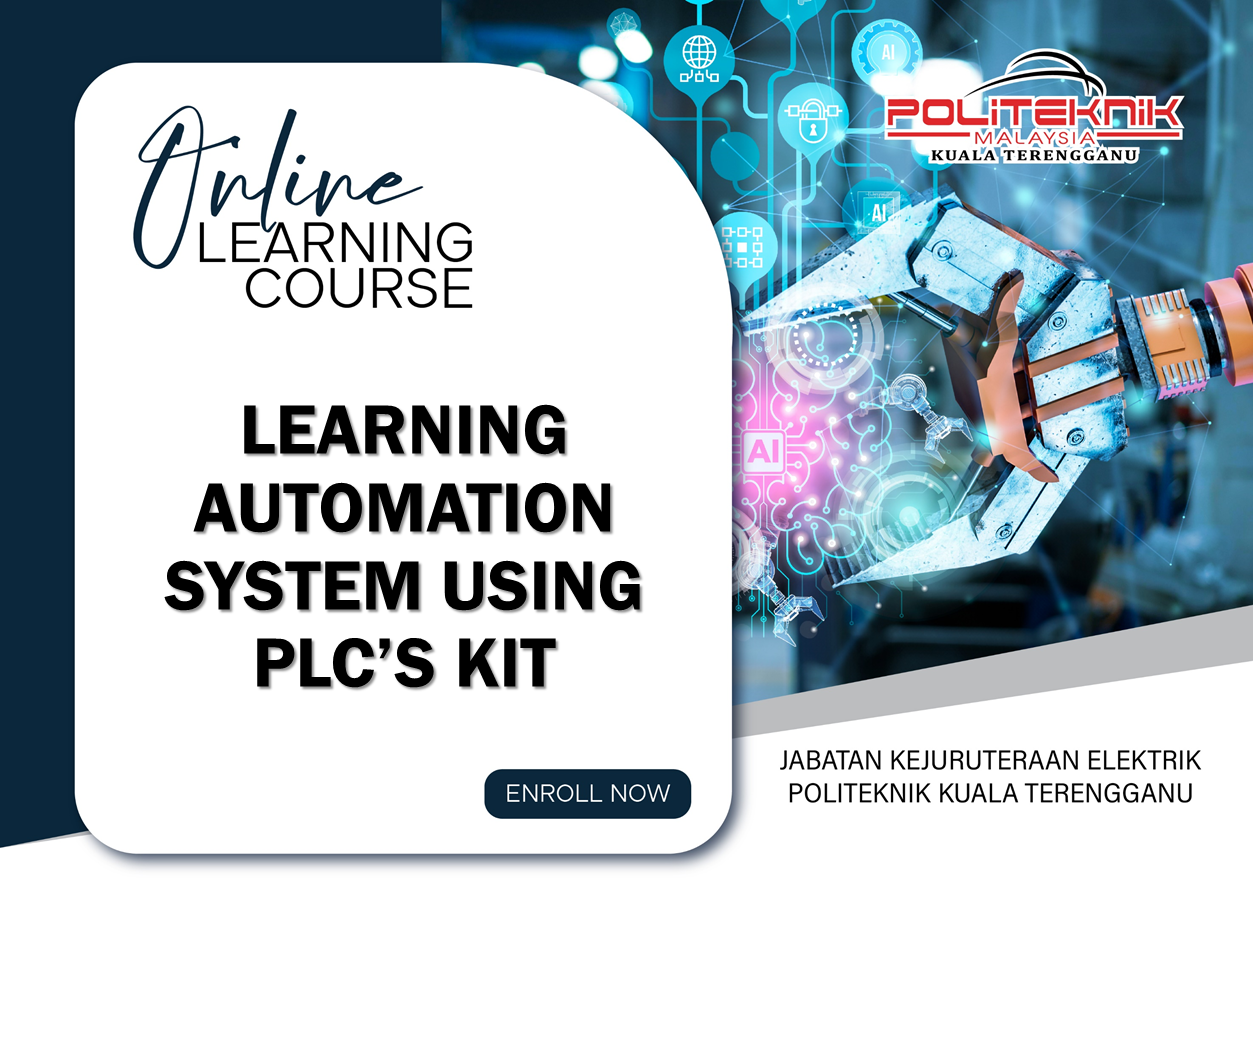 LEARNING AUTOMATION SYSTEM USING PLC'S KIT